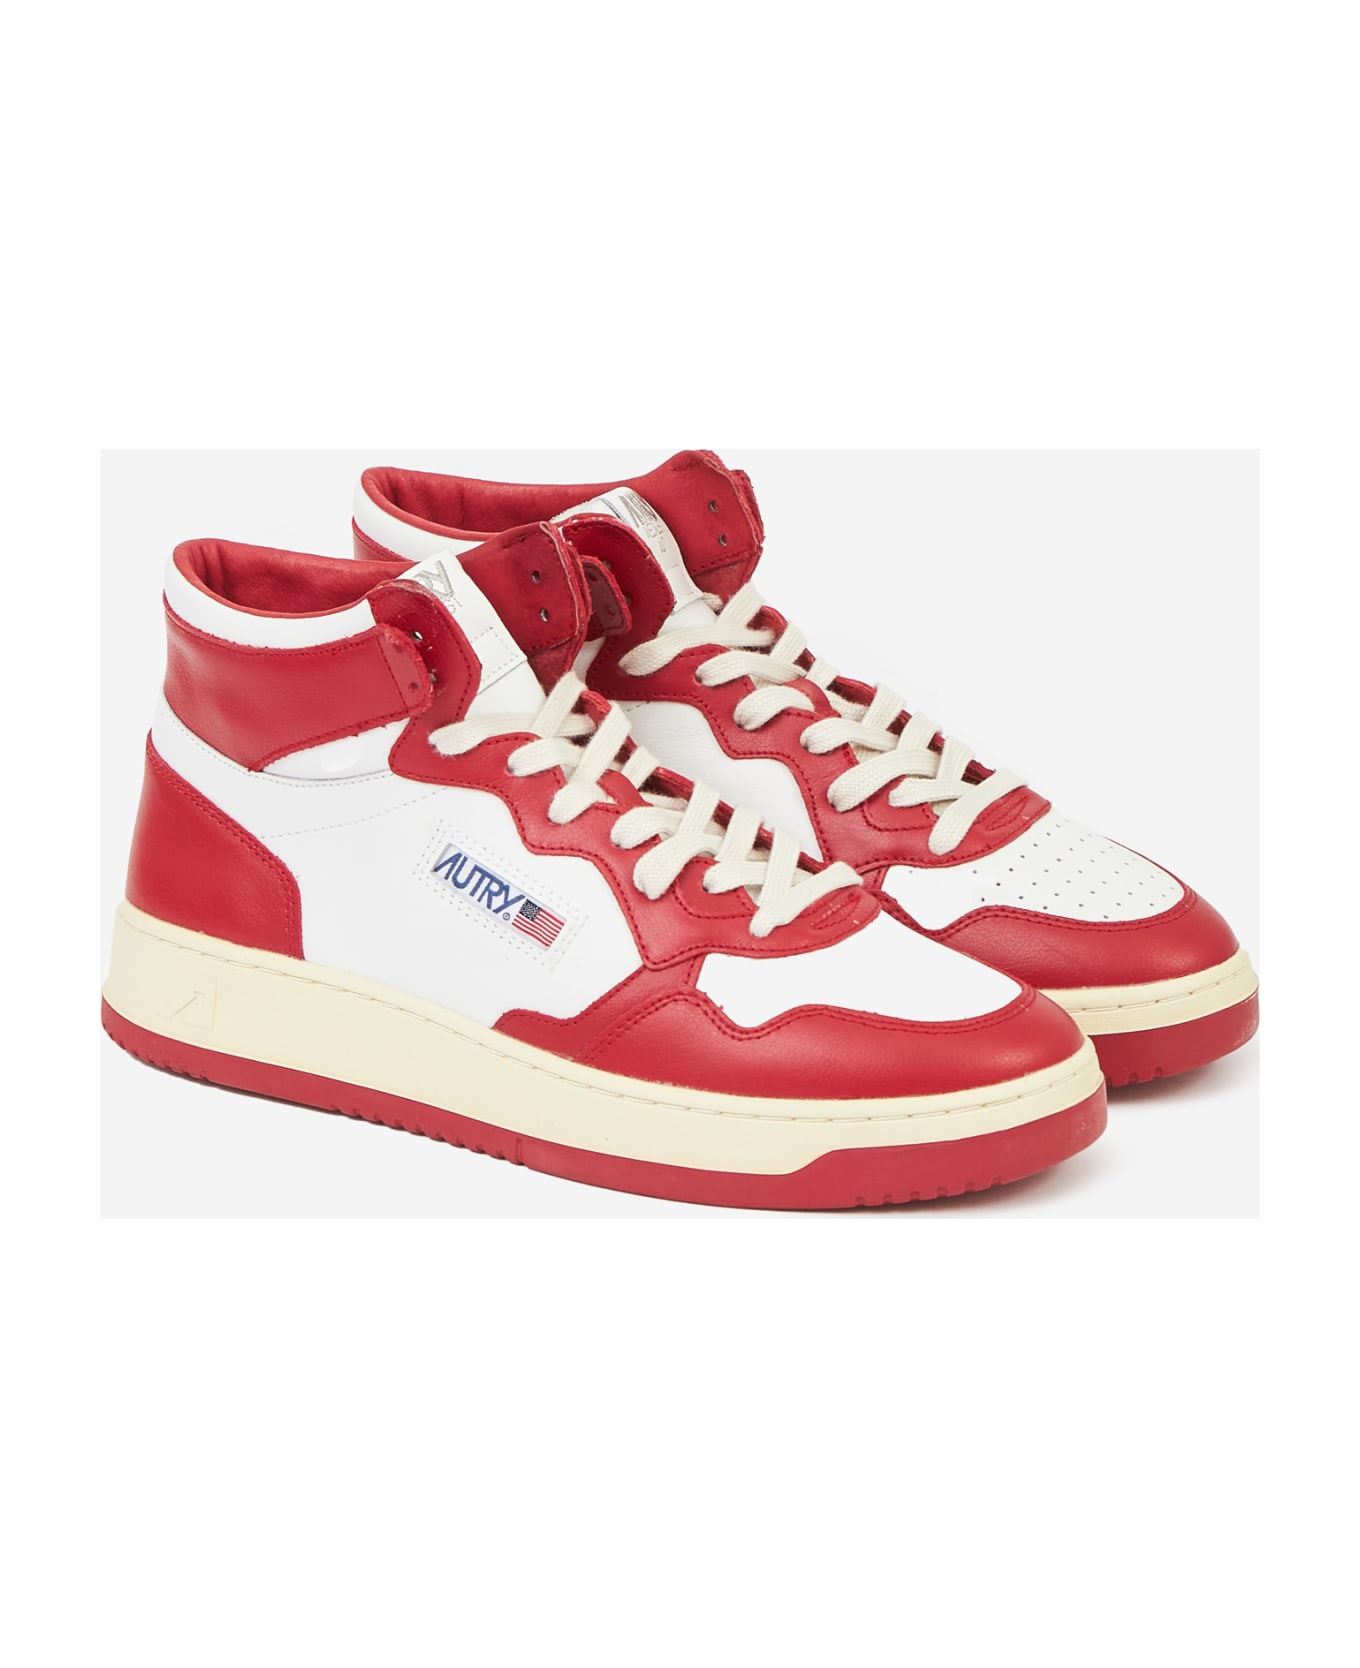 Autry 01 Mid Sneakers - white